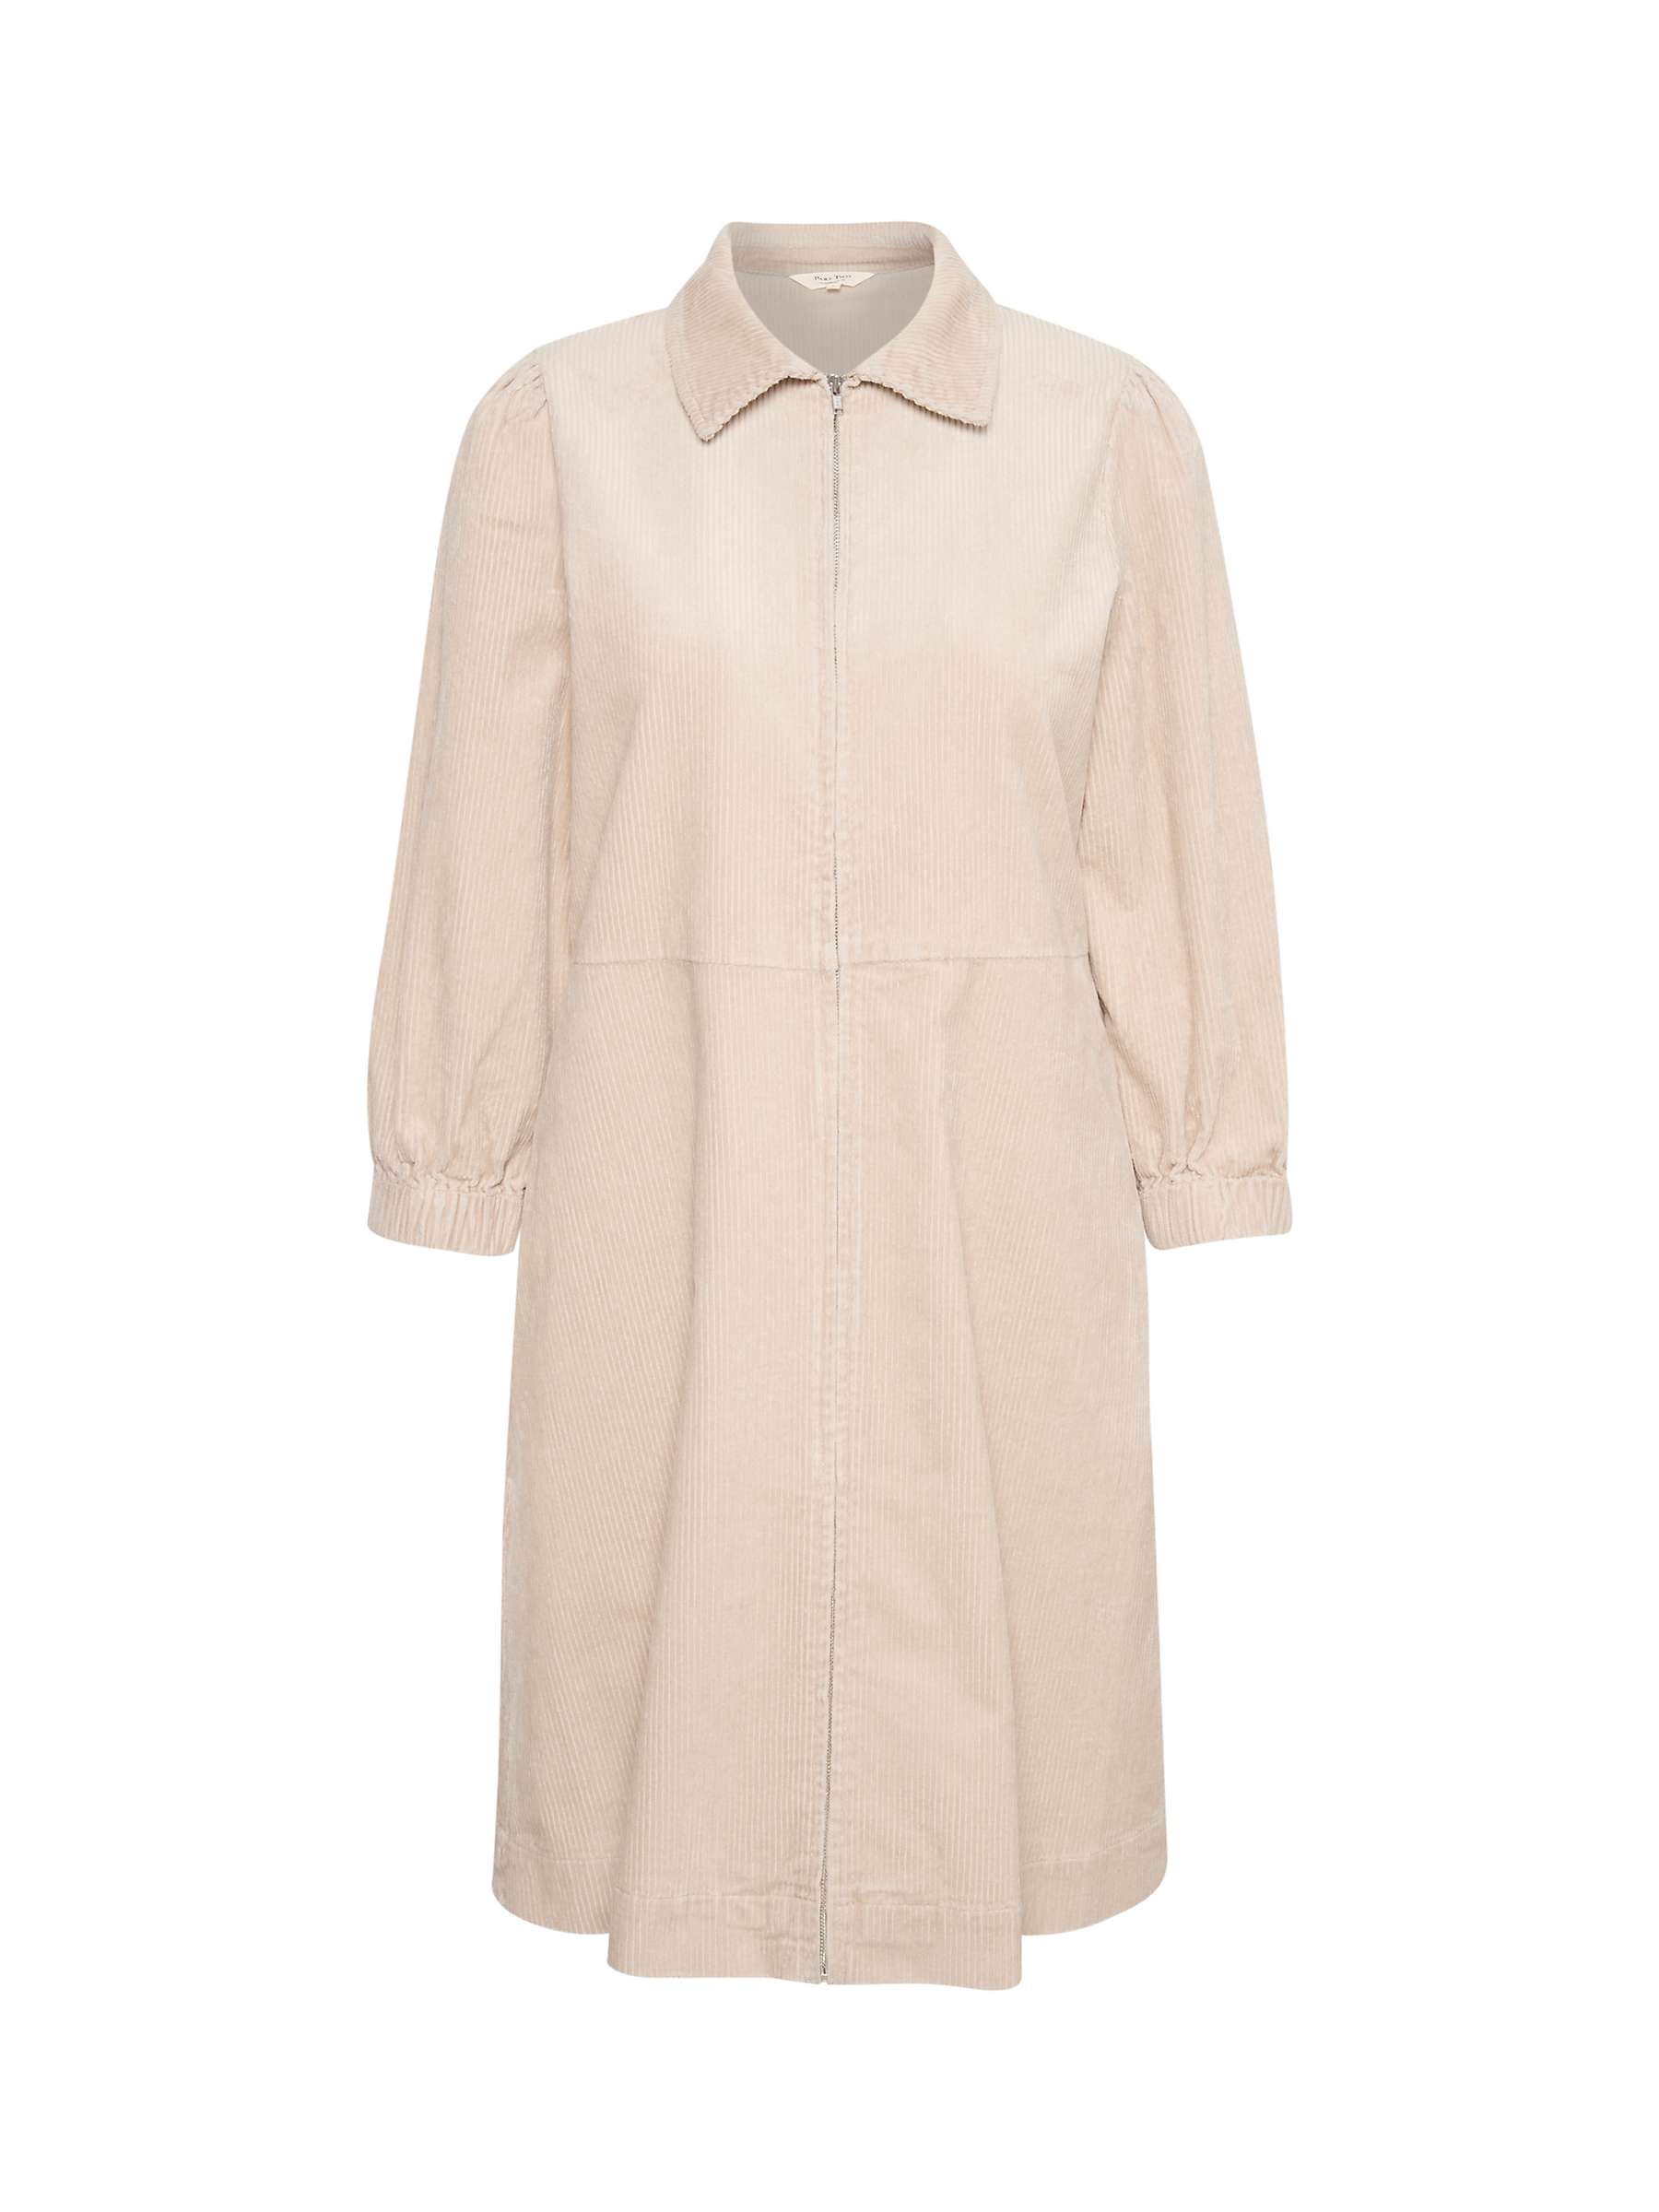 Buy Part Two Eyvors Relaxed Fit Corduroy Dress Online at johnlewis.com